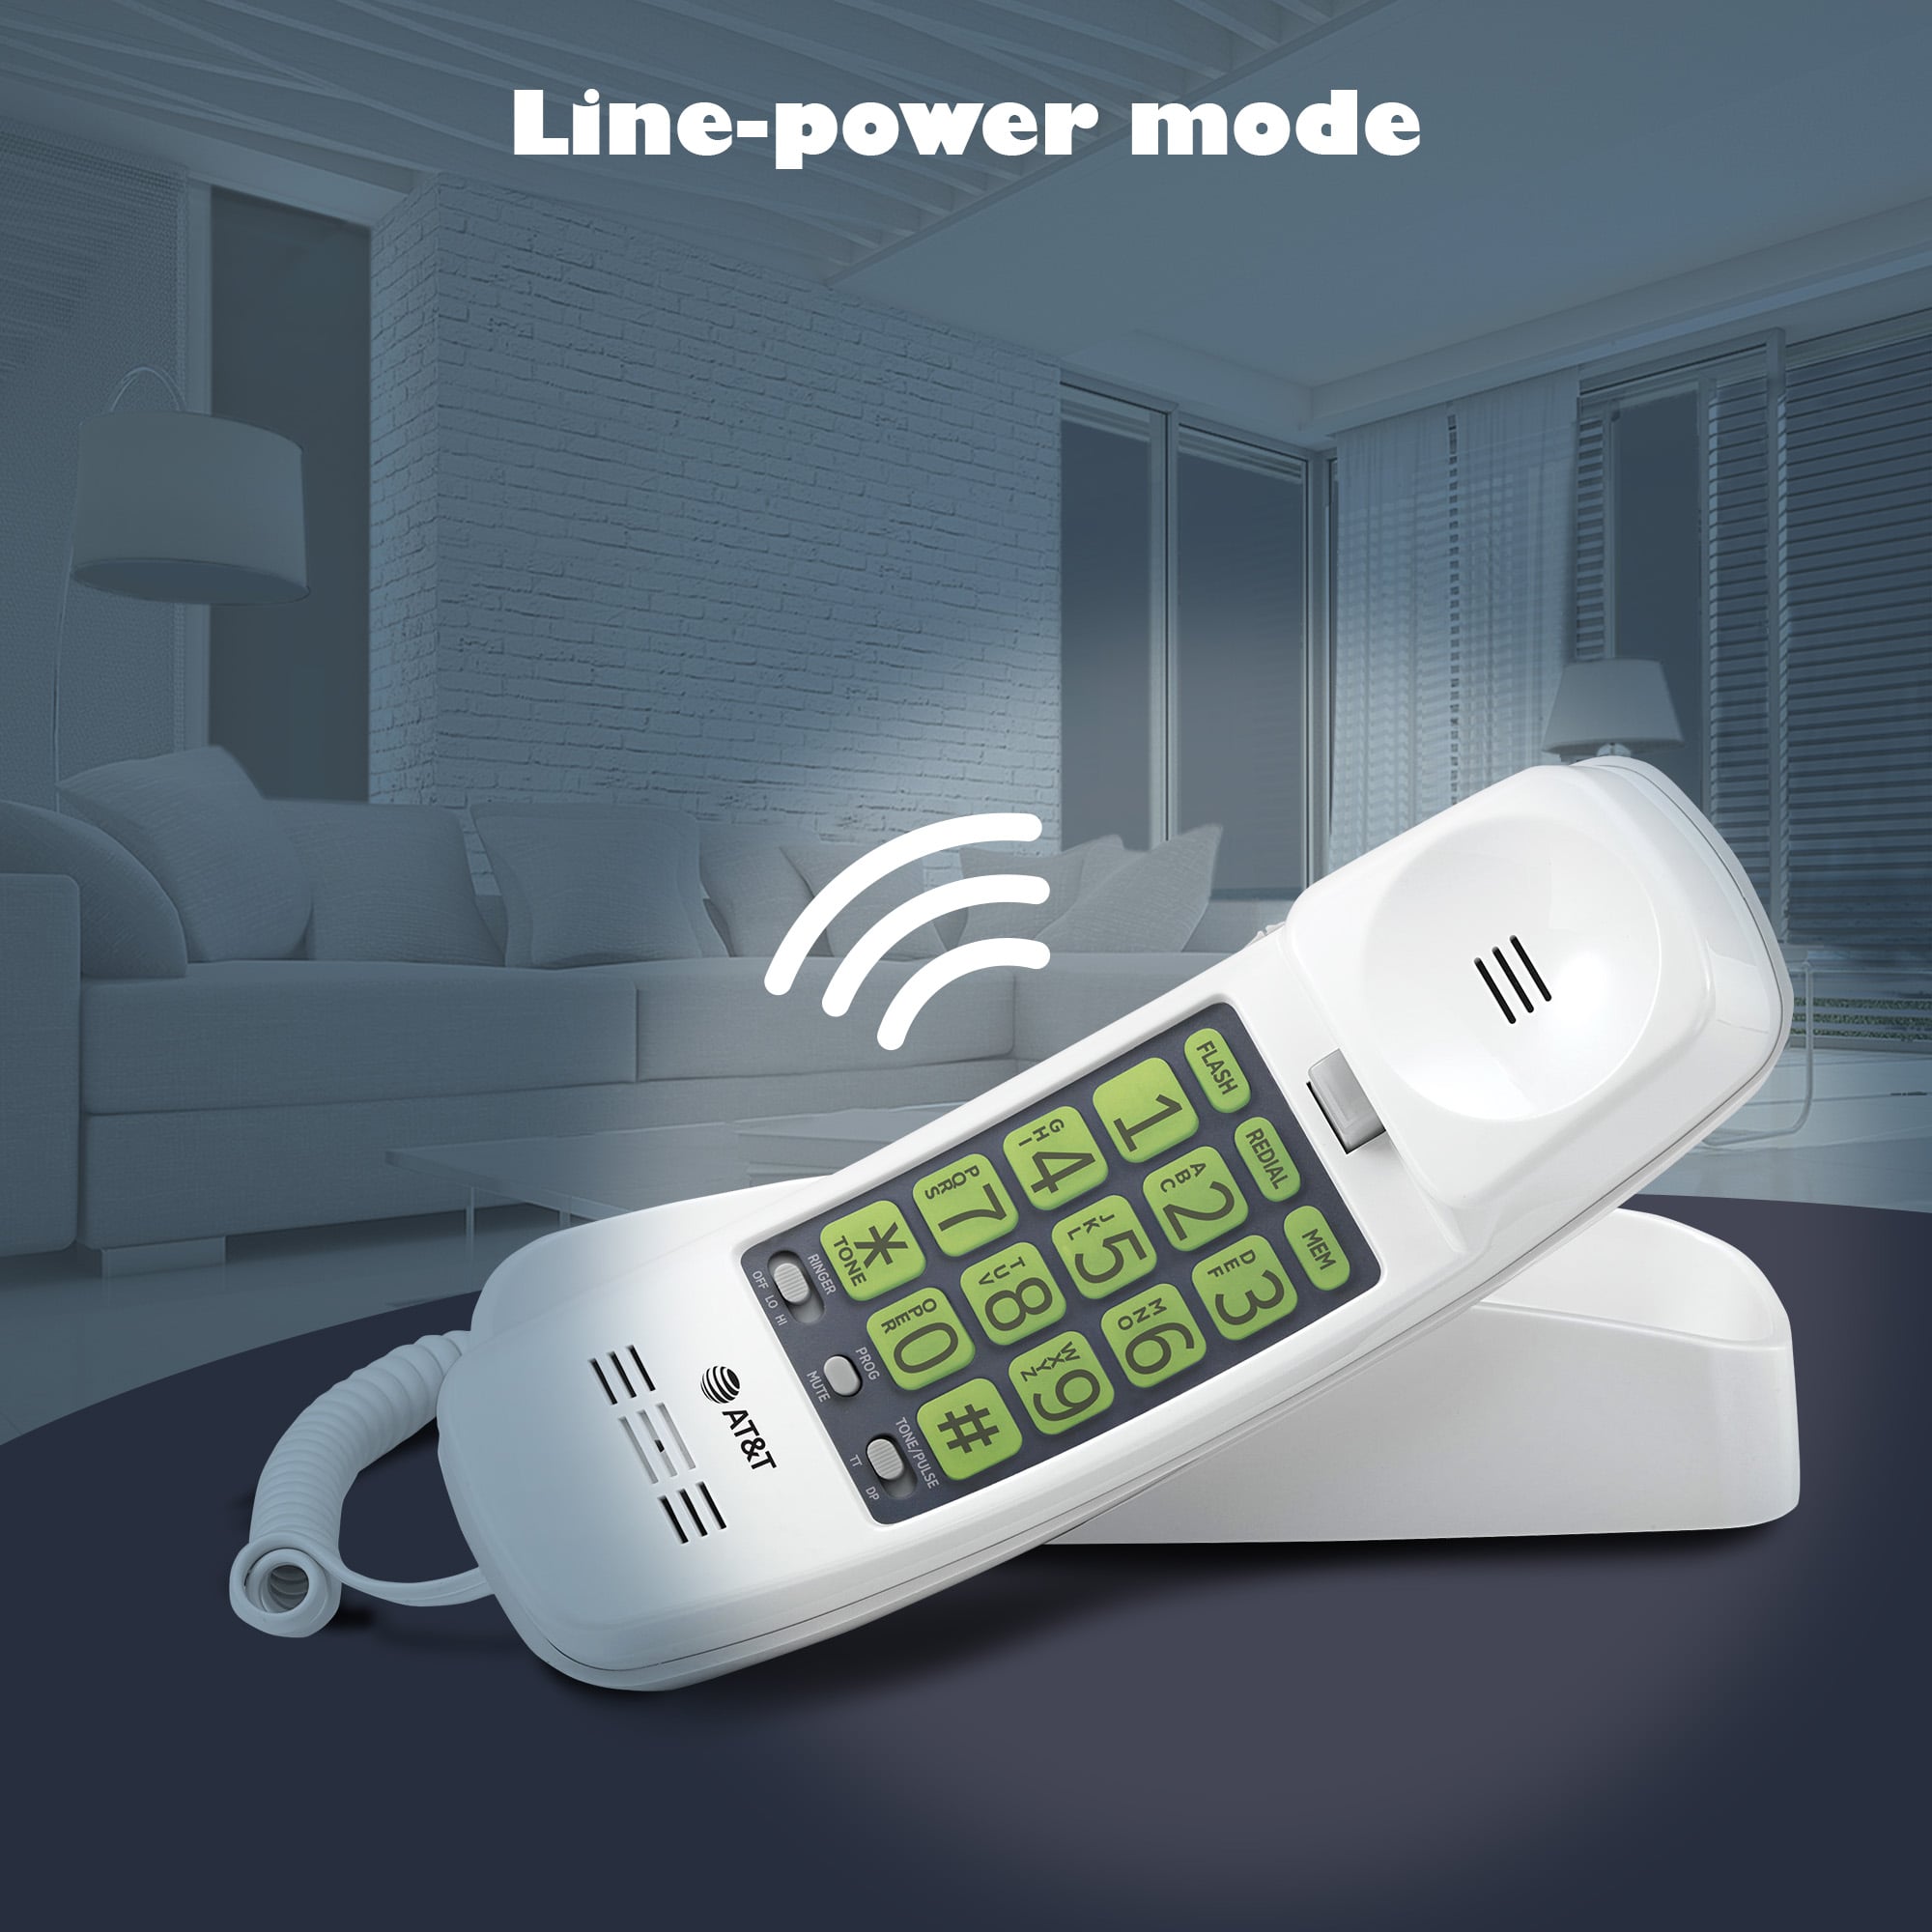 Trimline Corded Phone with Extra Large Buttons, NO AC Power Required, Wall-Mountable - view 5